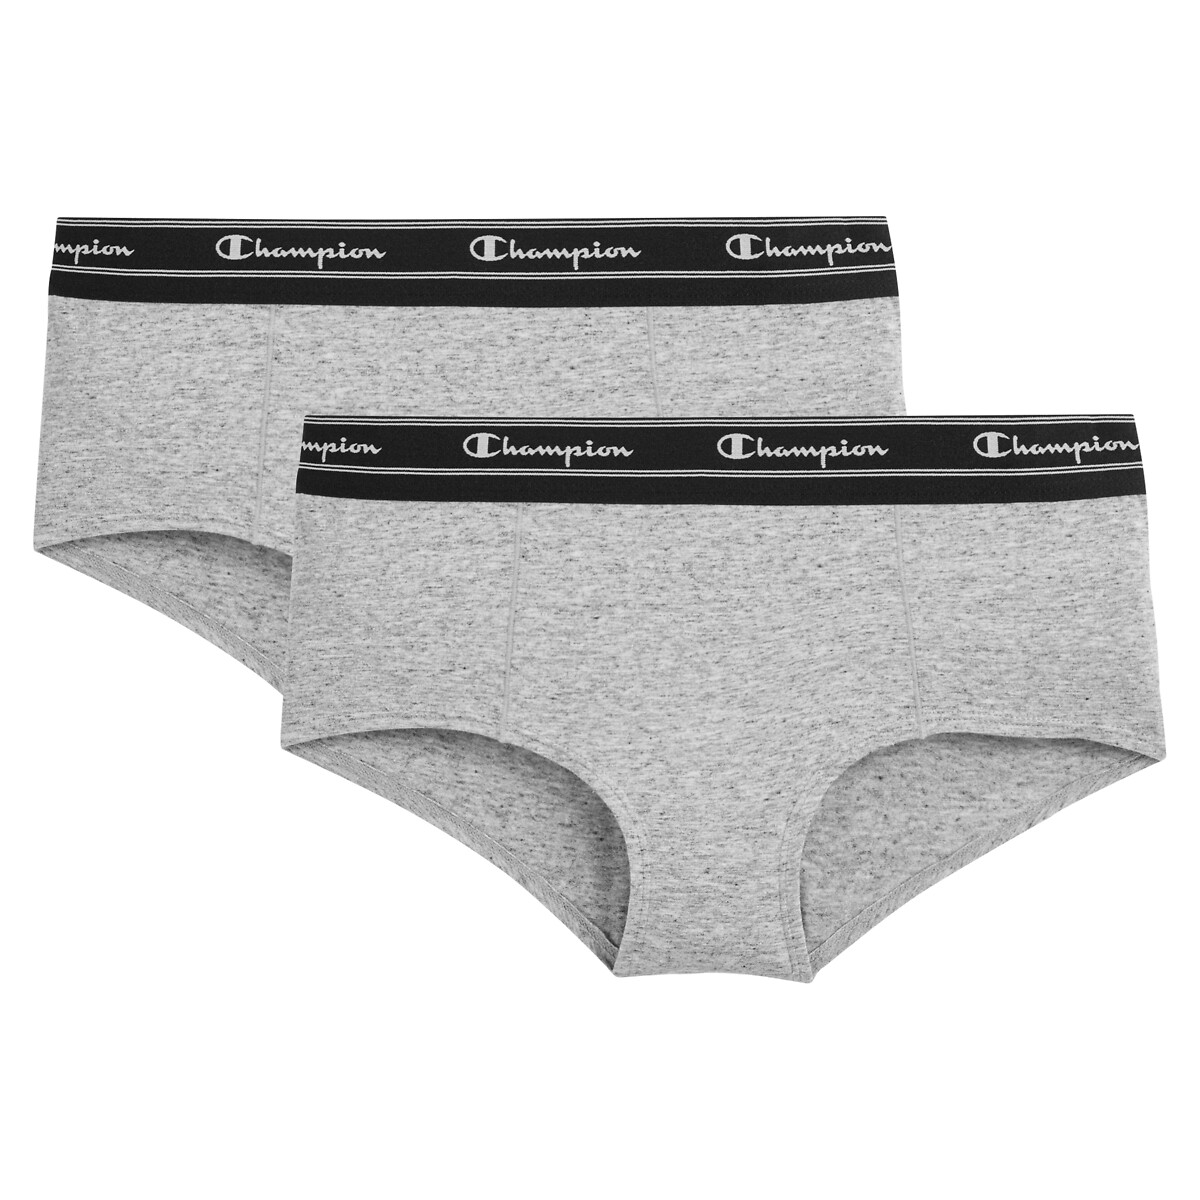 Pack of 2 sports knickers, grey, Champion